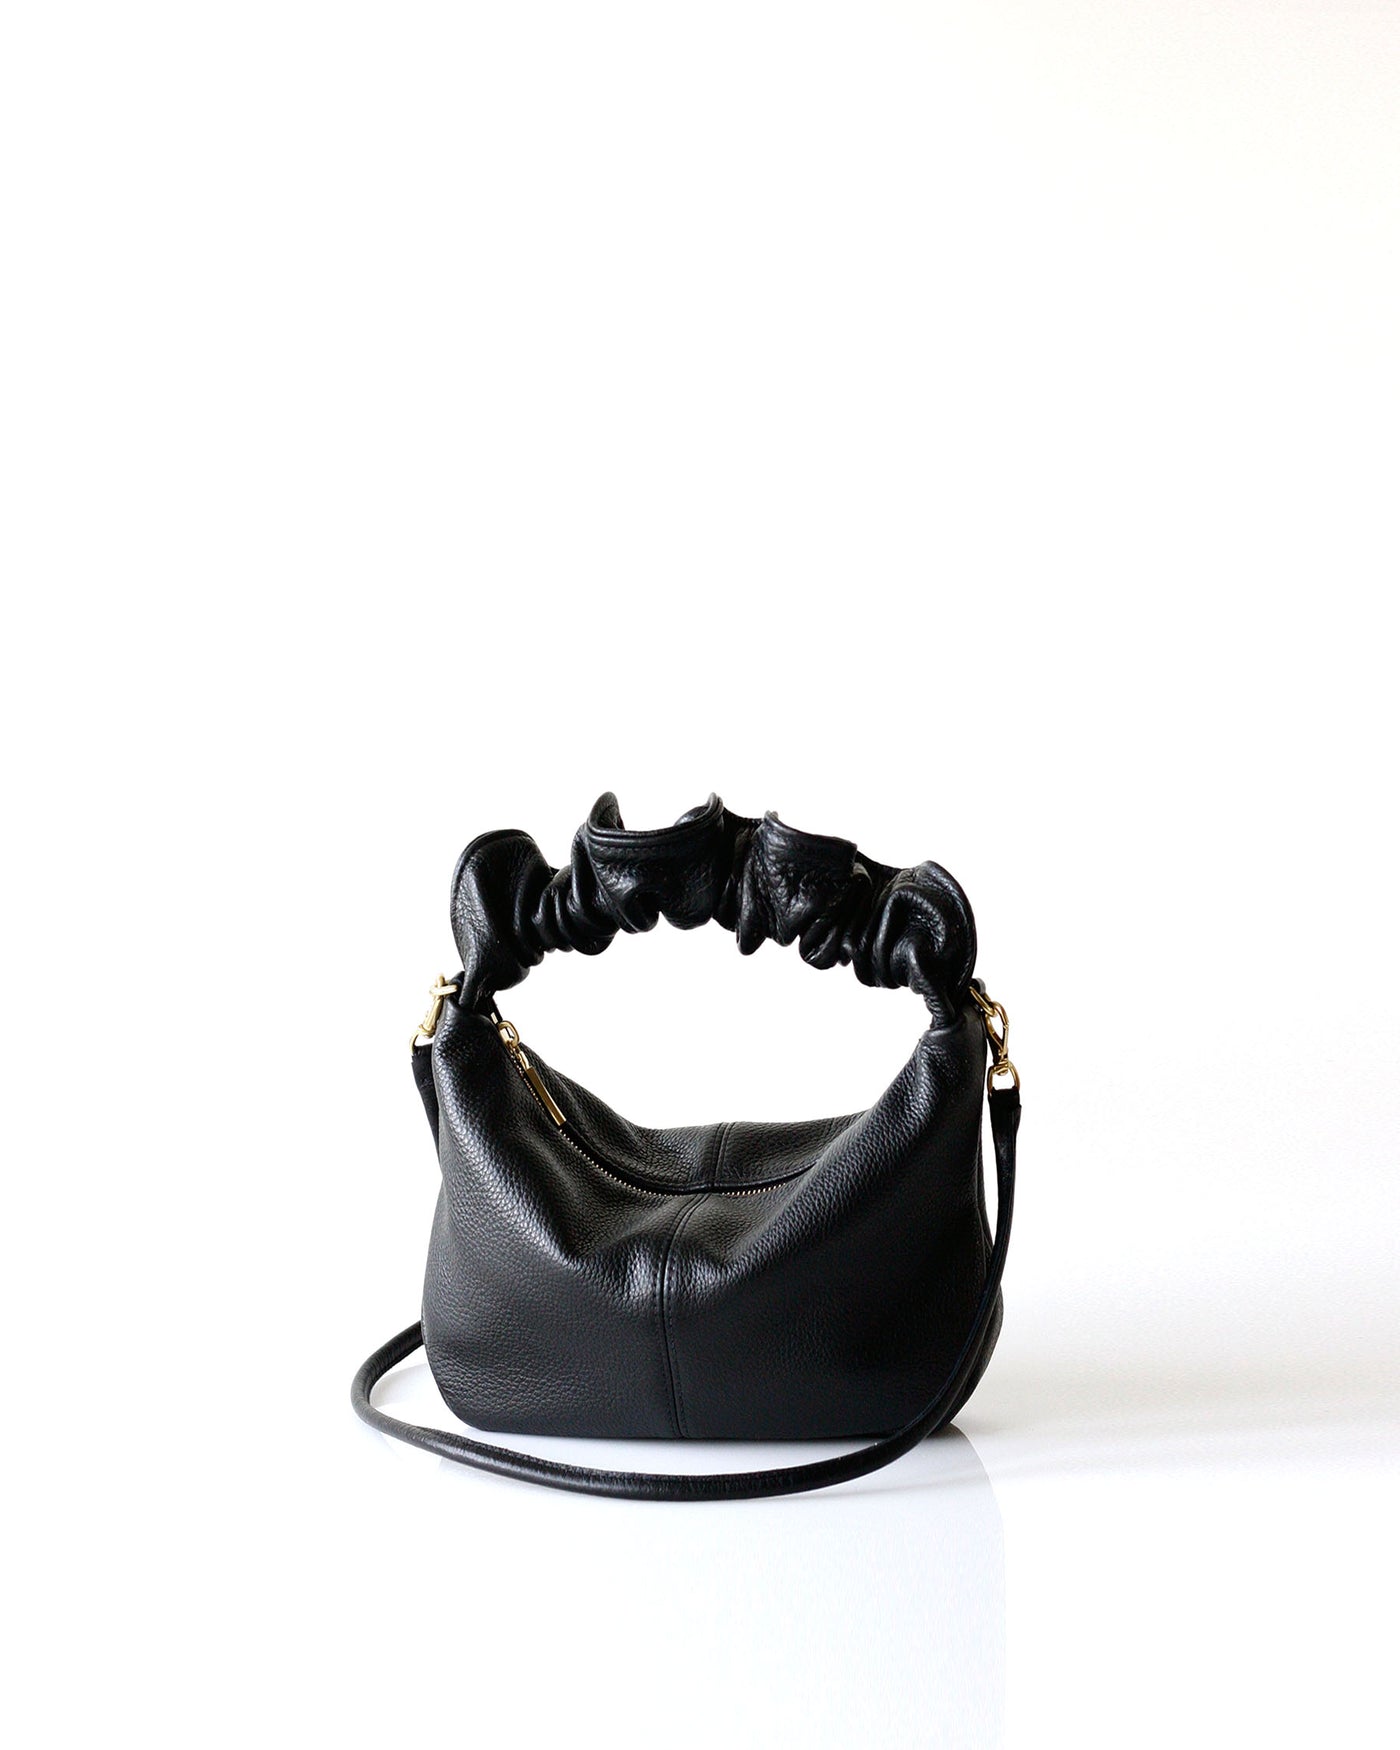 Evie Bundle Bag - Opelle bag Permanent Collection - Opelle leather handbag handcrafted leather bag toronto Canada